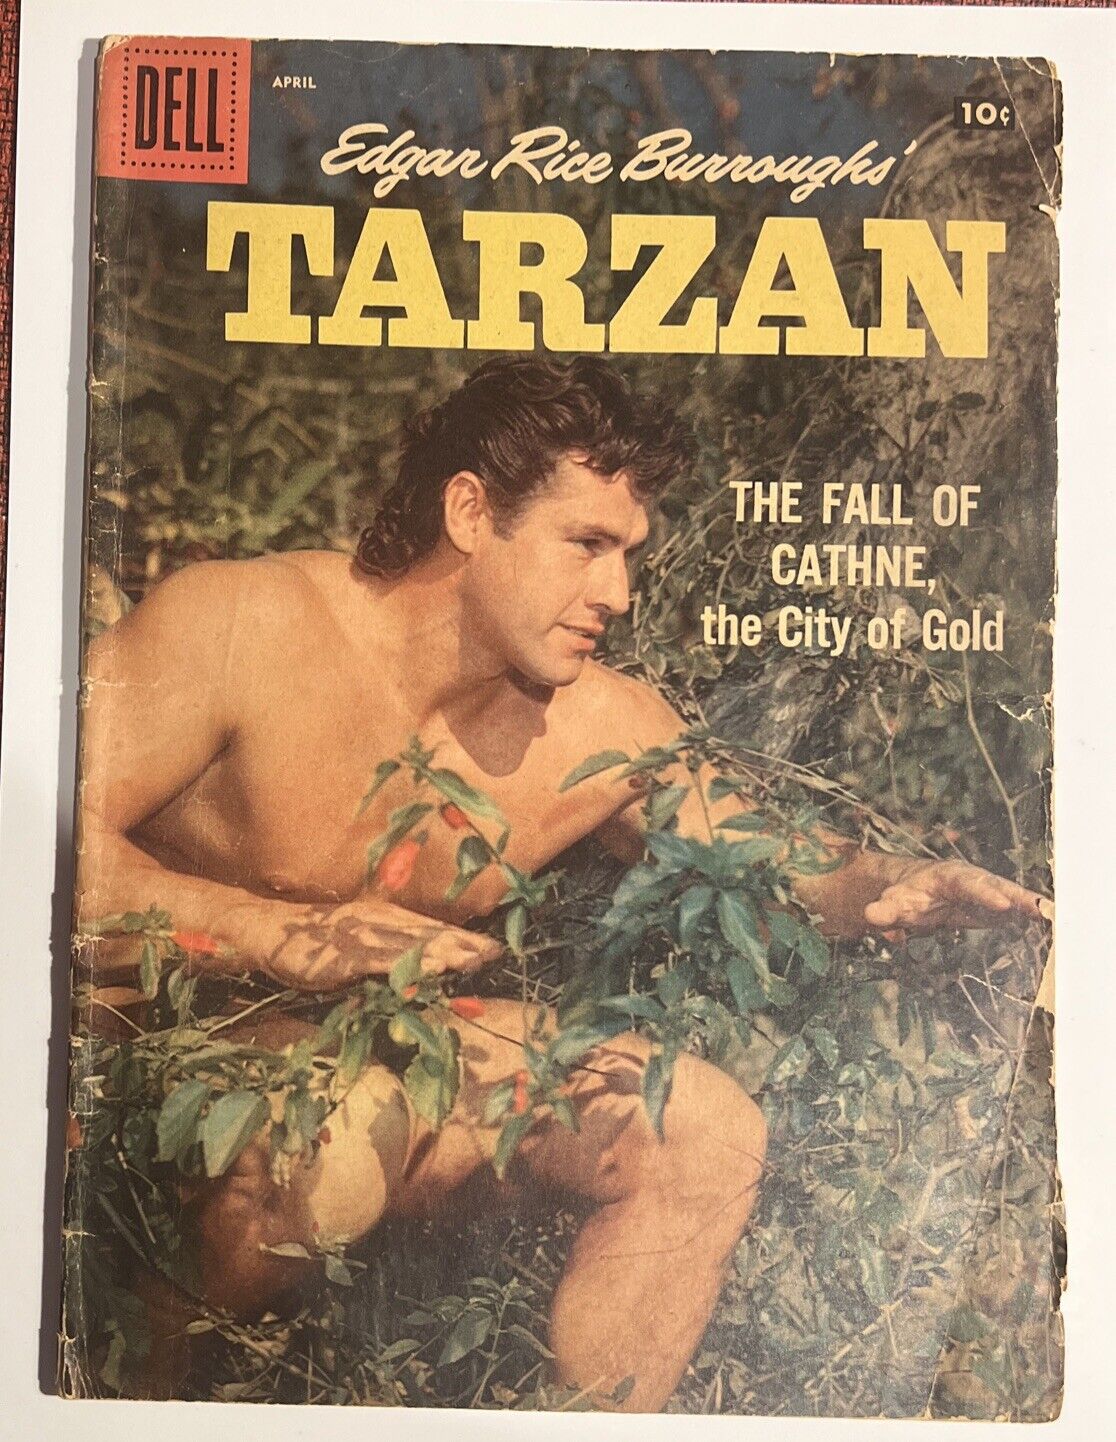 Tarzan Vol 1 #103 April 1958 The Fall of Cathne the City of Gold Comic Book